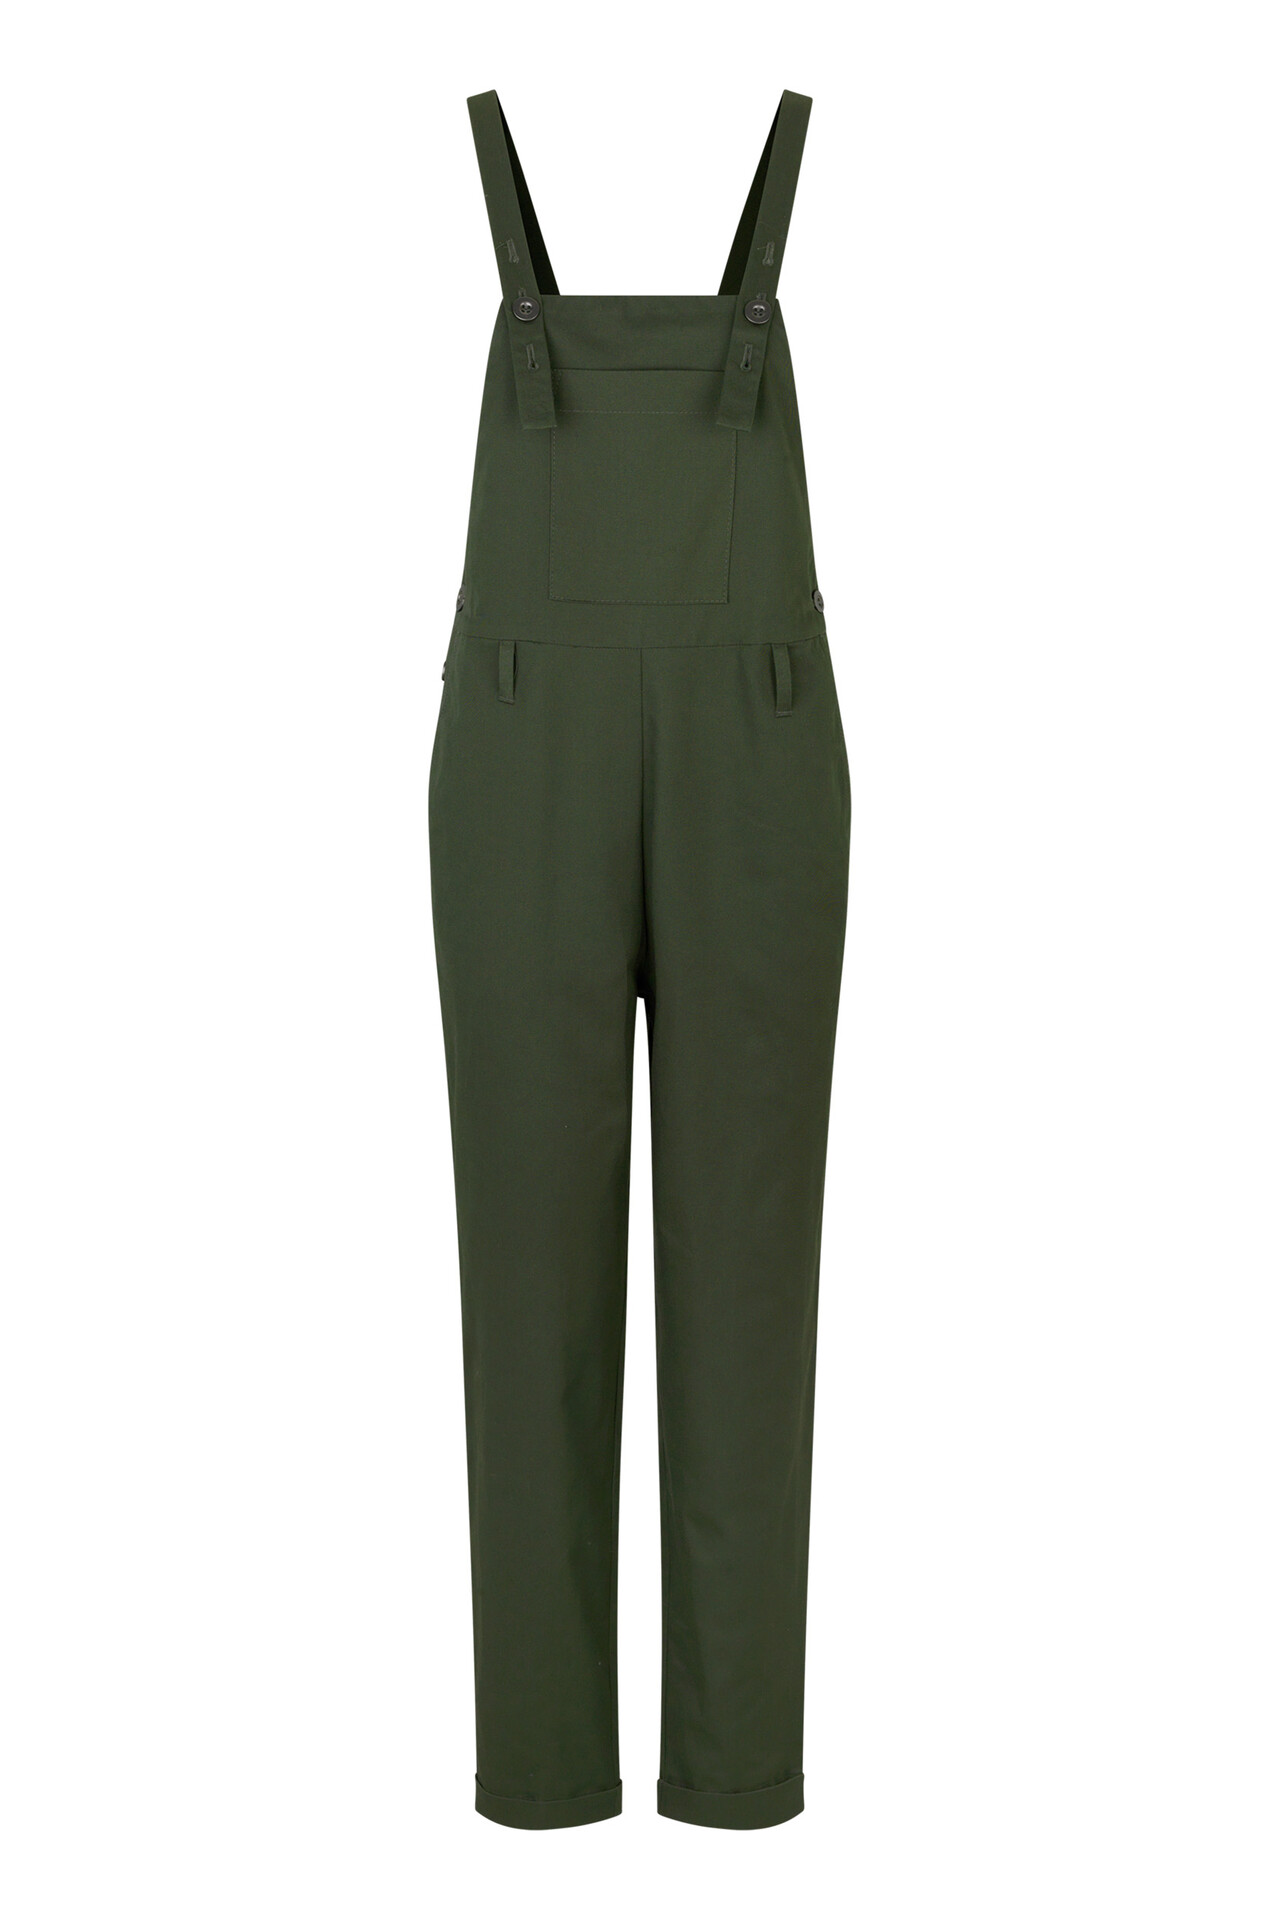 CRÉTON Worker overalls (ARMY GRØN 34)